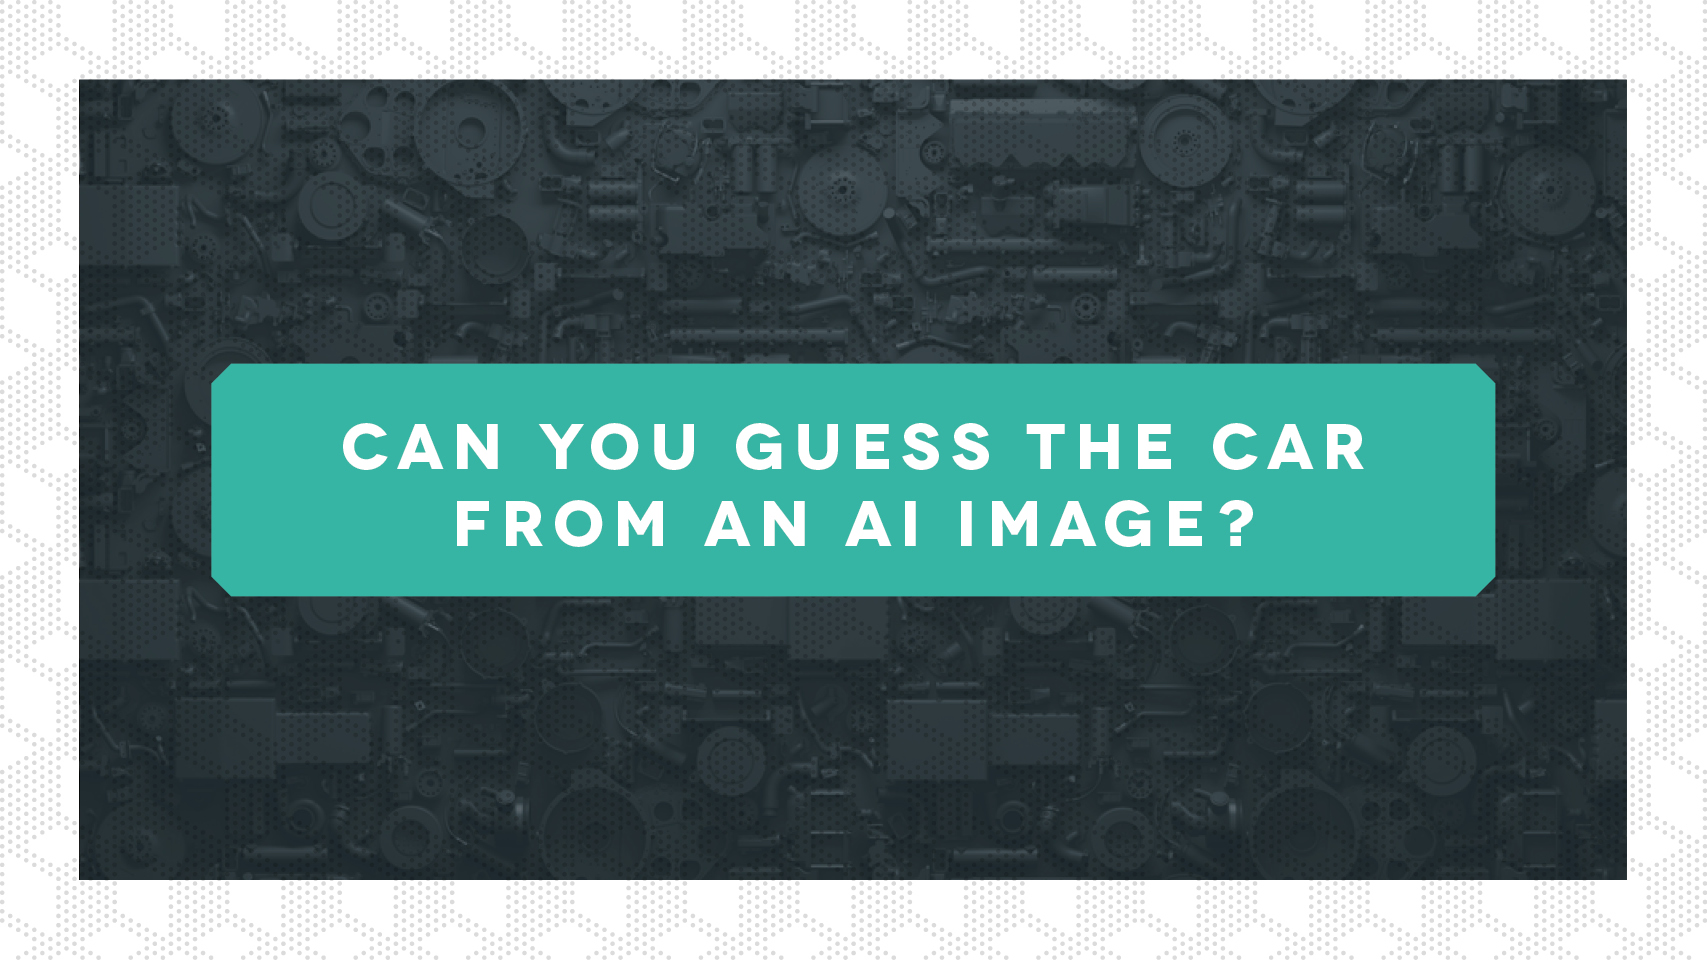 How recognisable are car images created by artificial intelligence?